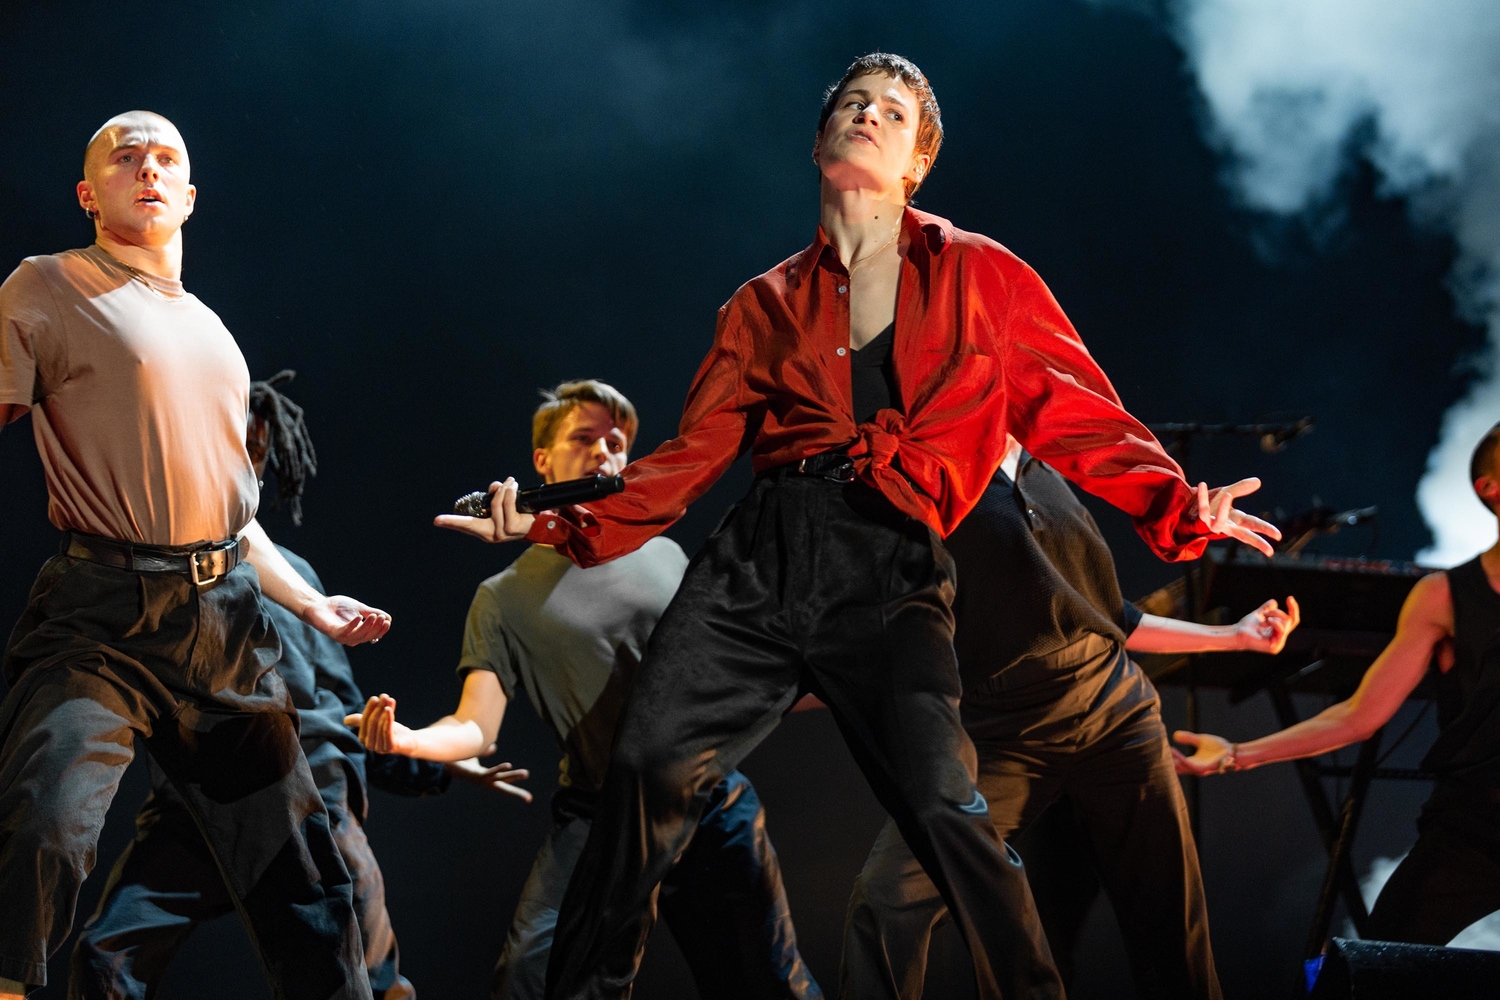 Christine and the Queens battles the elements in style at All Points East